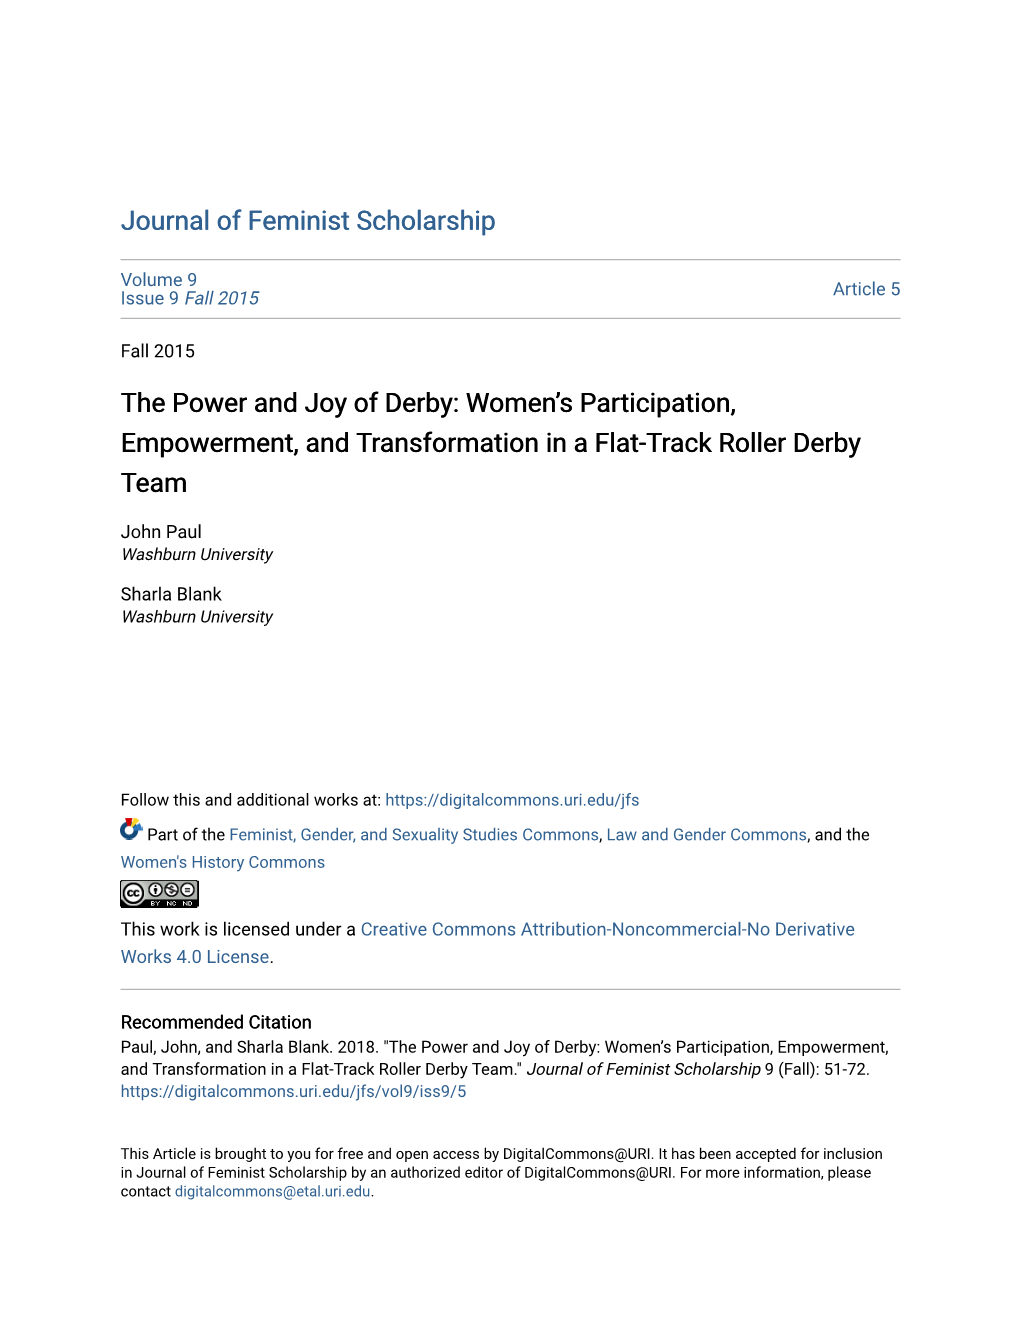 Women's Participation, Empowerment, and Transformation